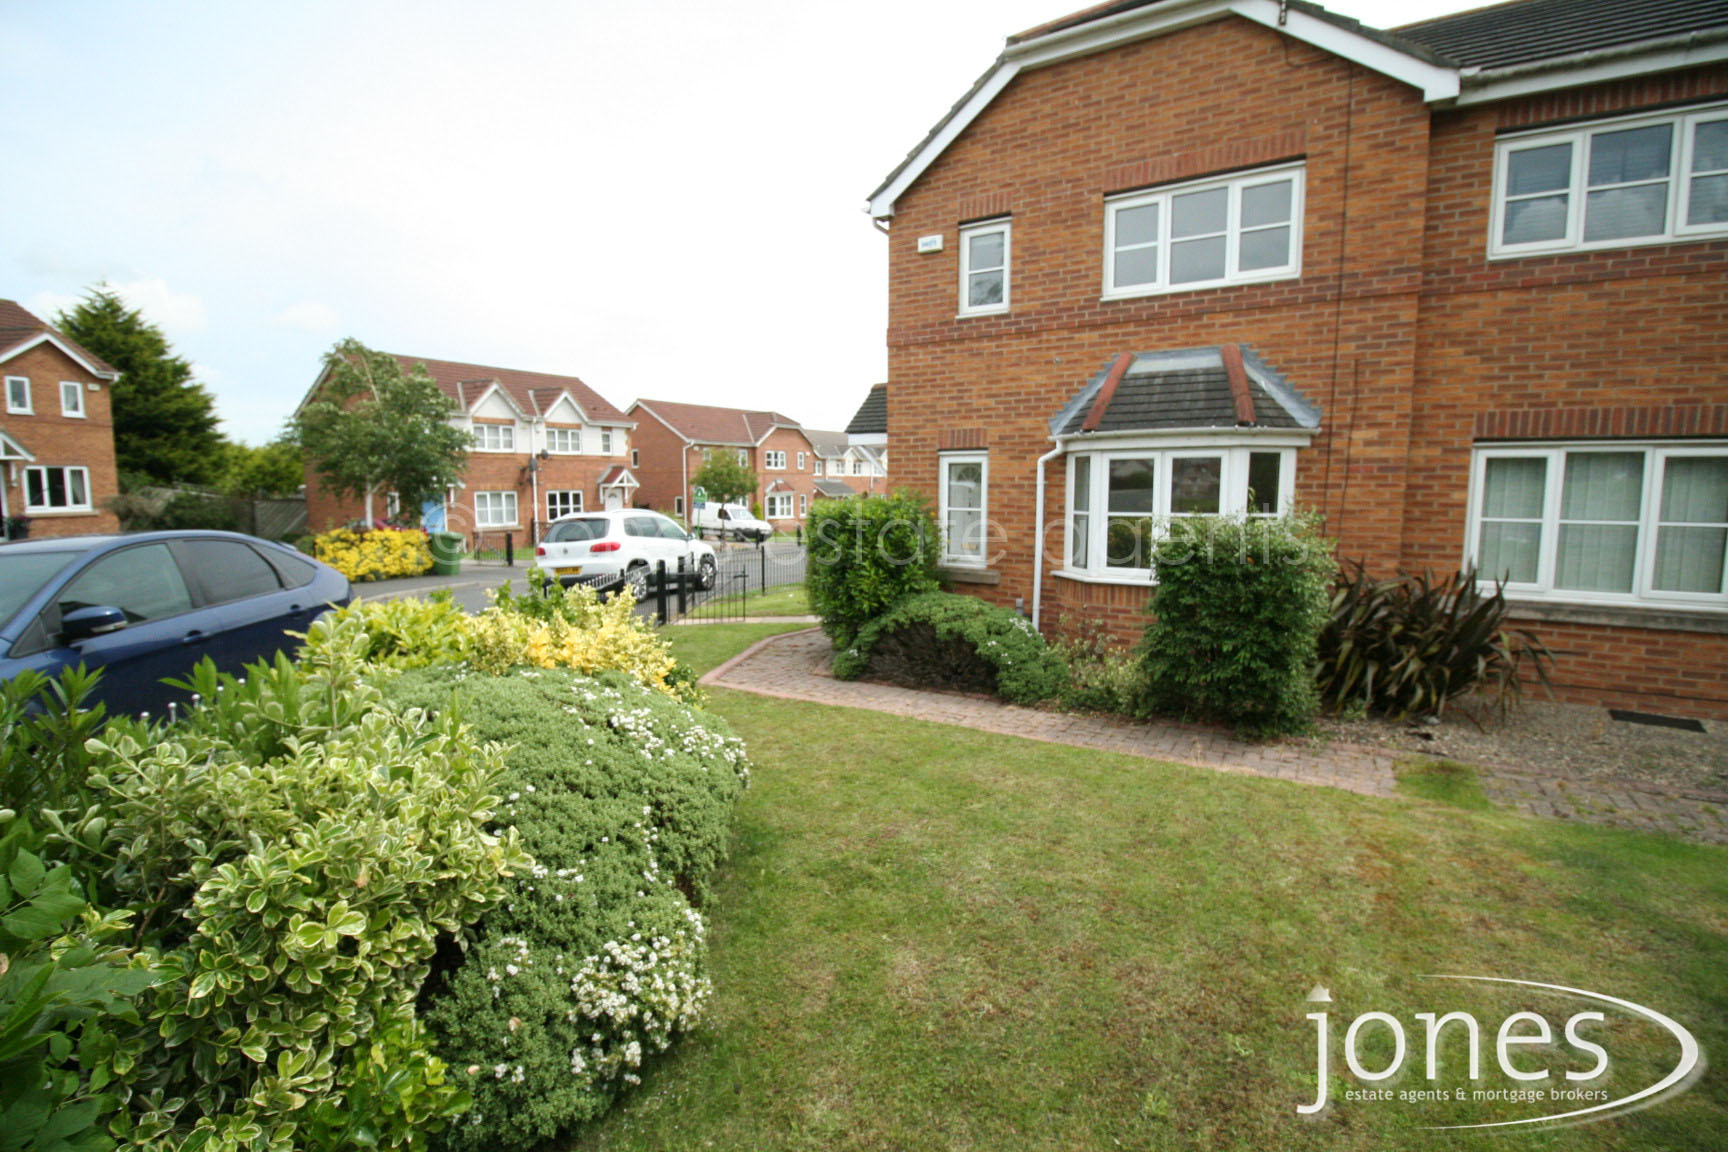 Home for Sale Let - Photo 01 Honeycomb Avenue, Stockton on Tees, TS19 0FF